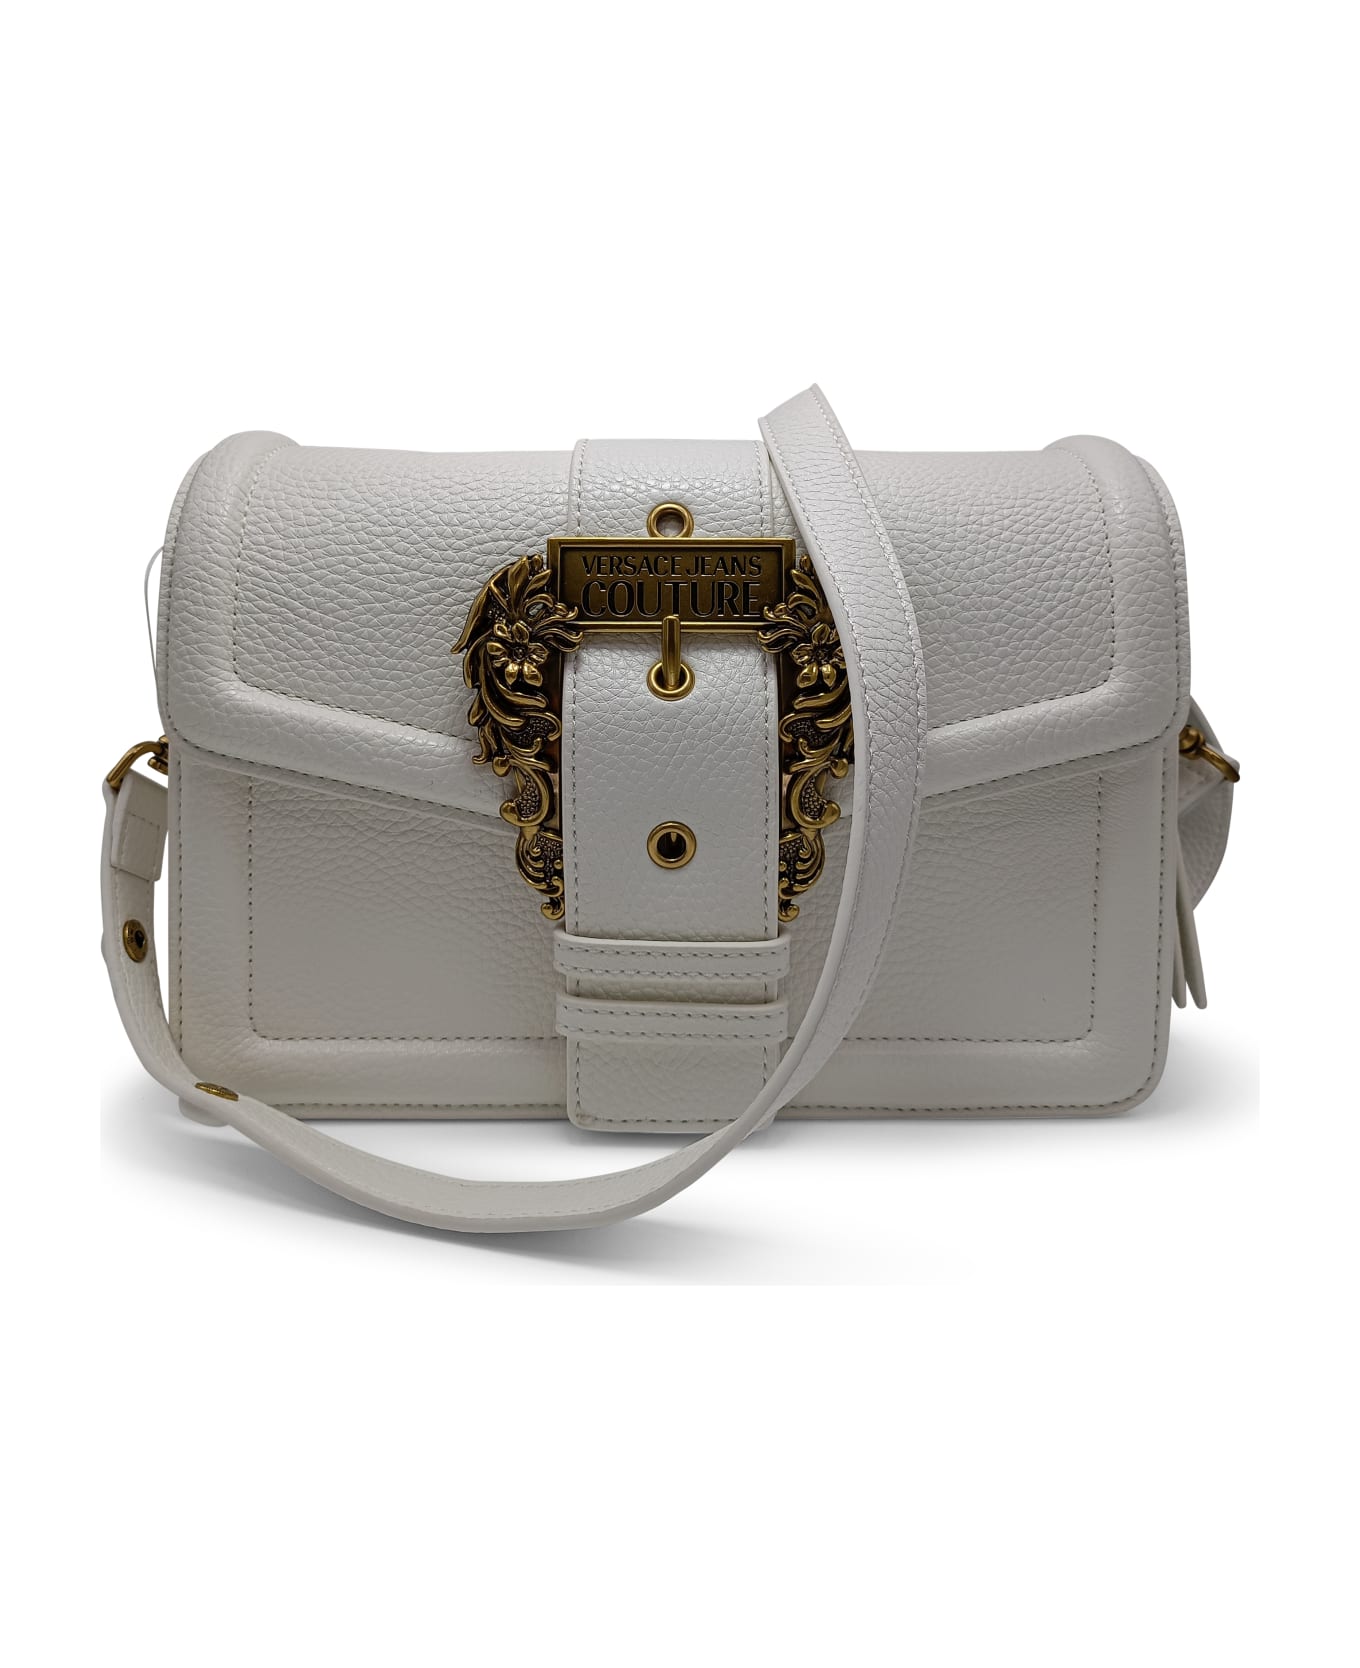 Versace Jeans Couture Bag - Bianco ショルダーバッグ